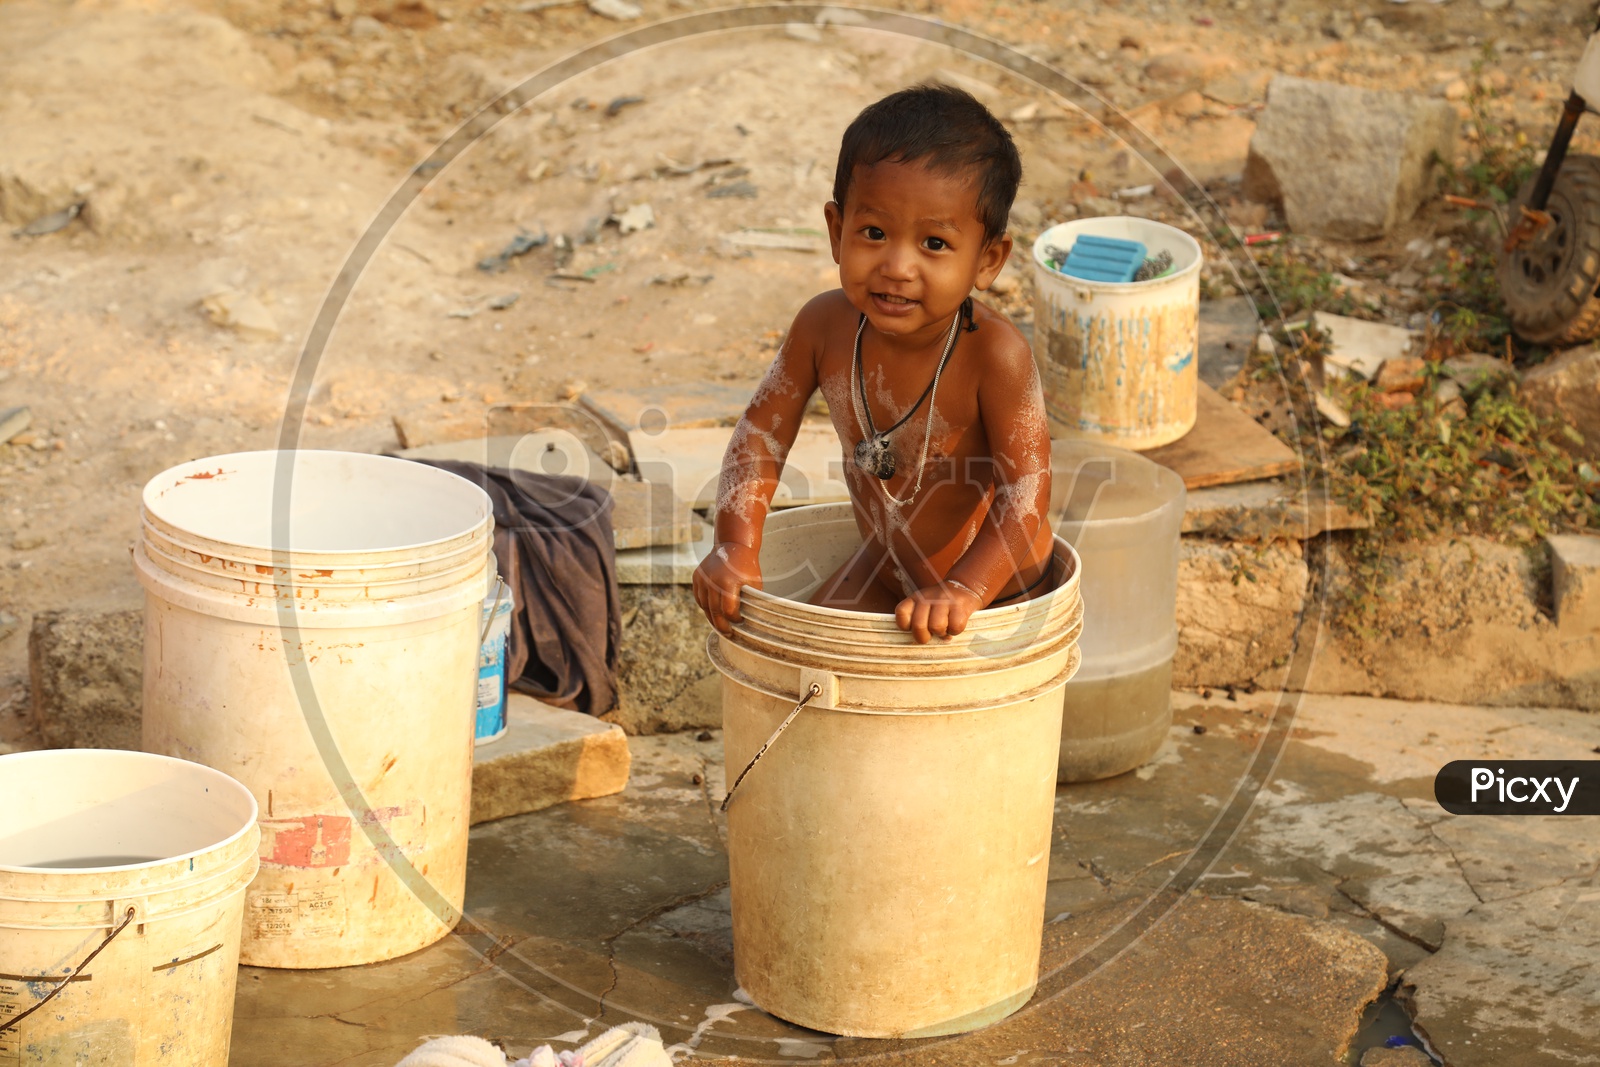 A Child playing with water in a bucket during bath